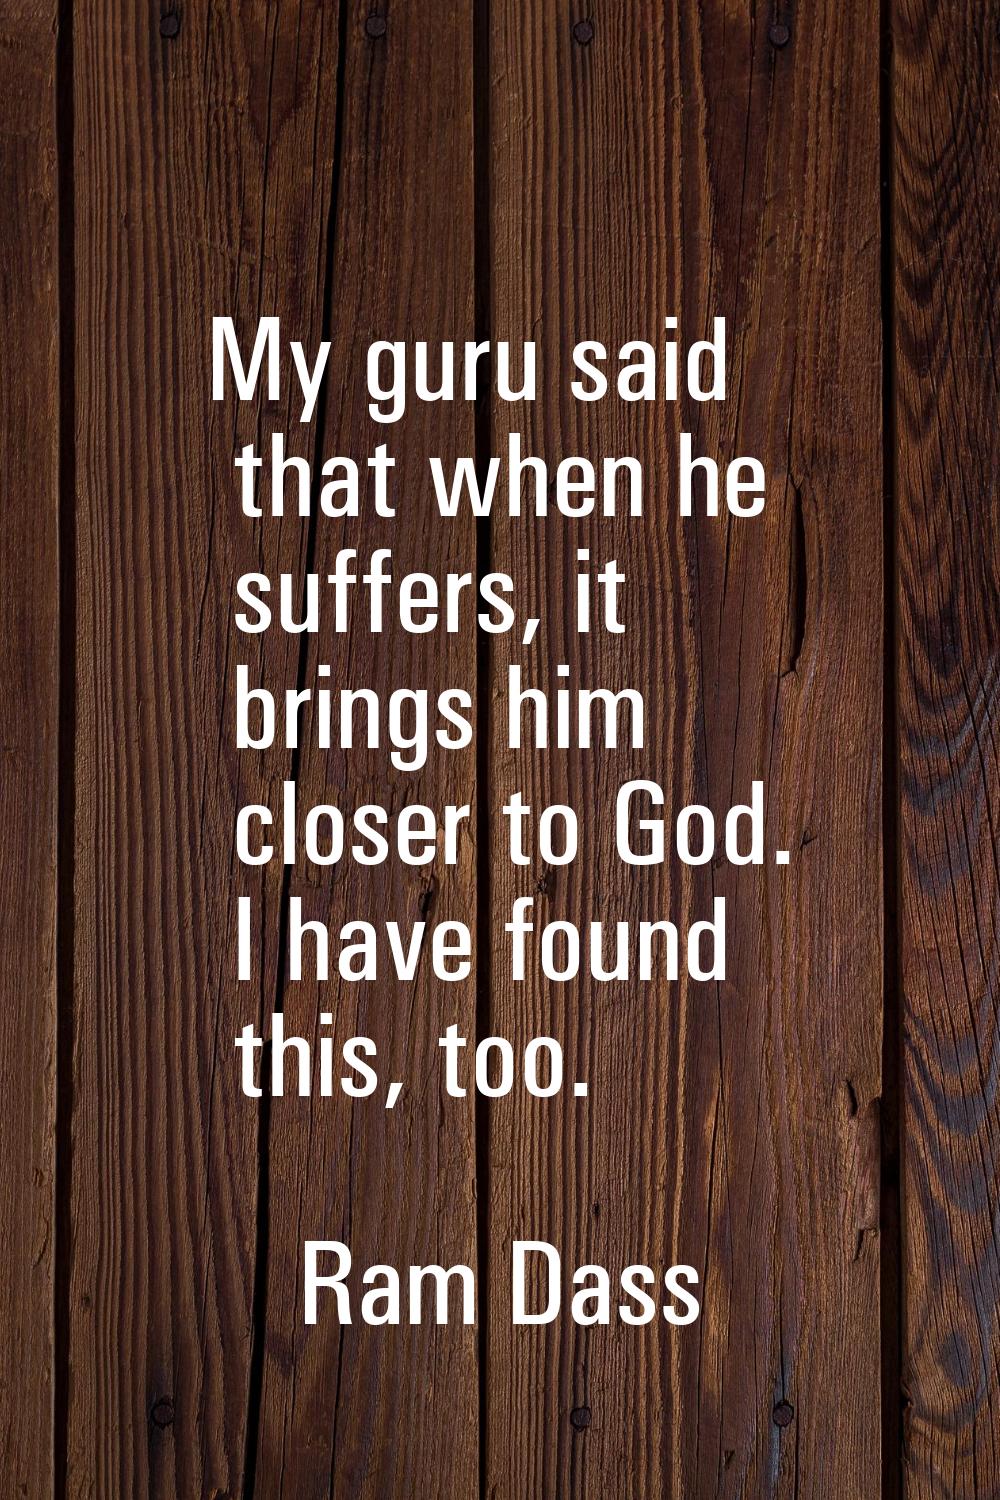 My guru said that when he suffers, it brings him closer to God. I have found this, too.